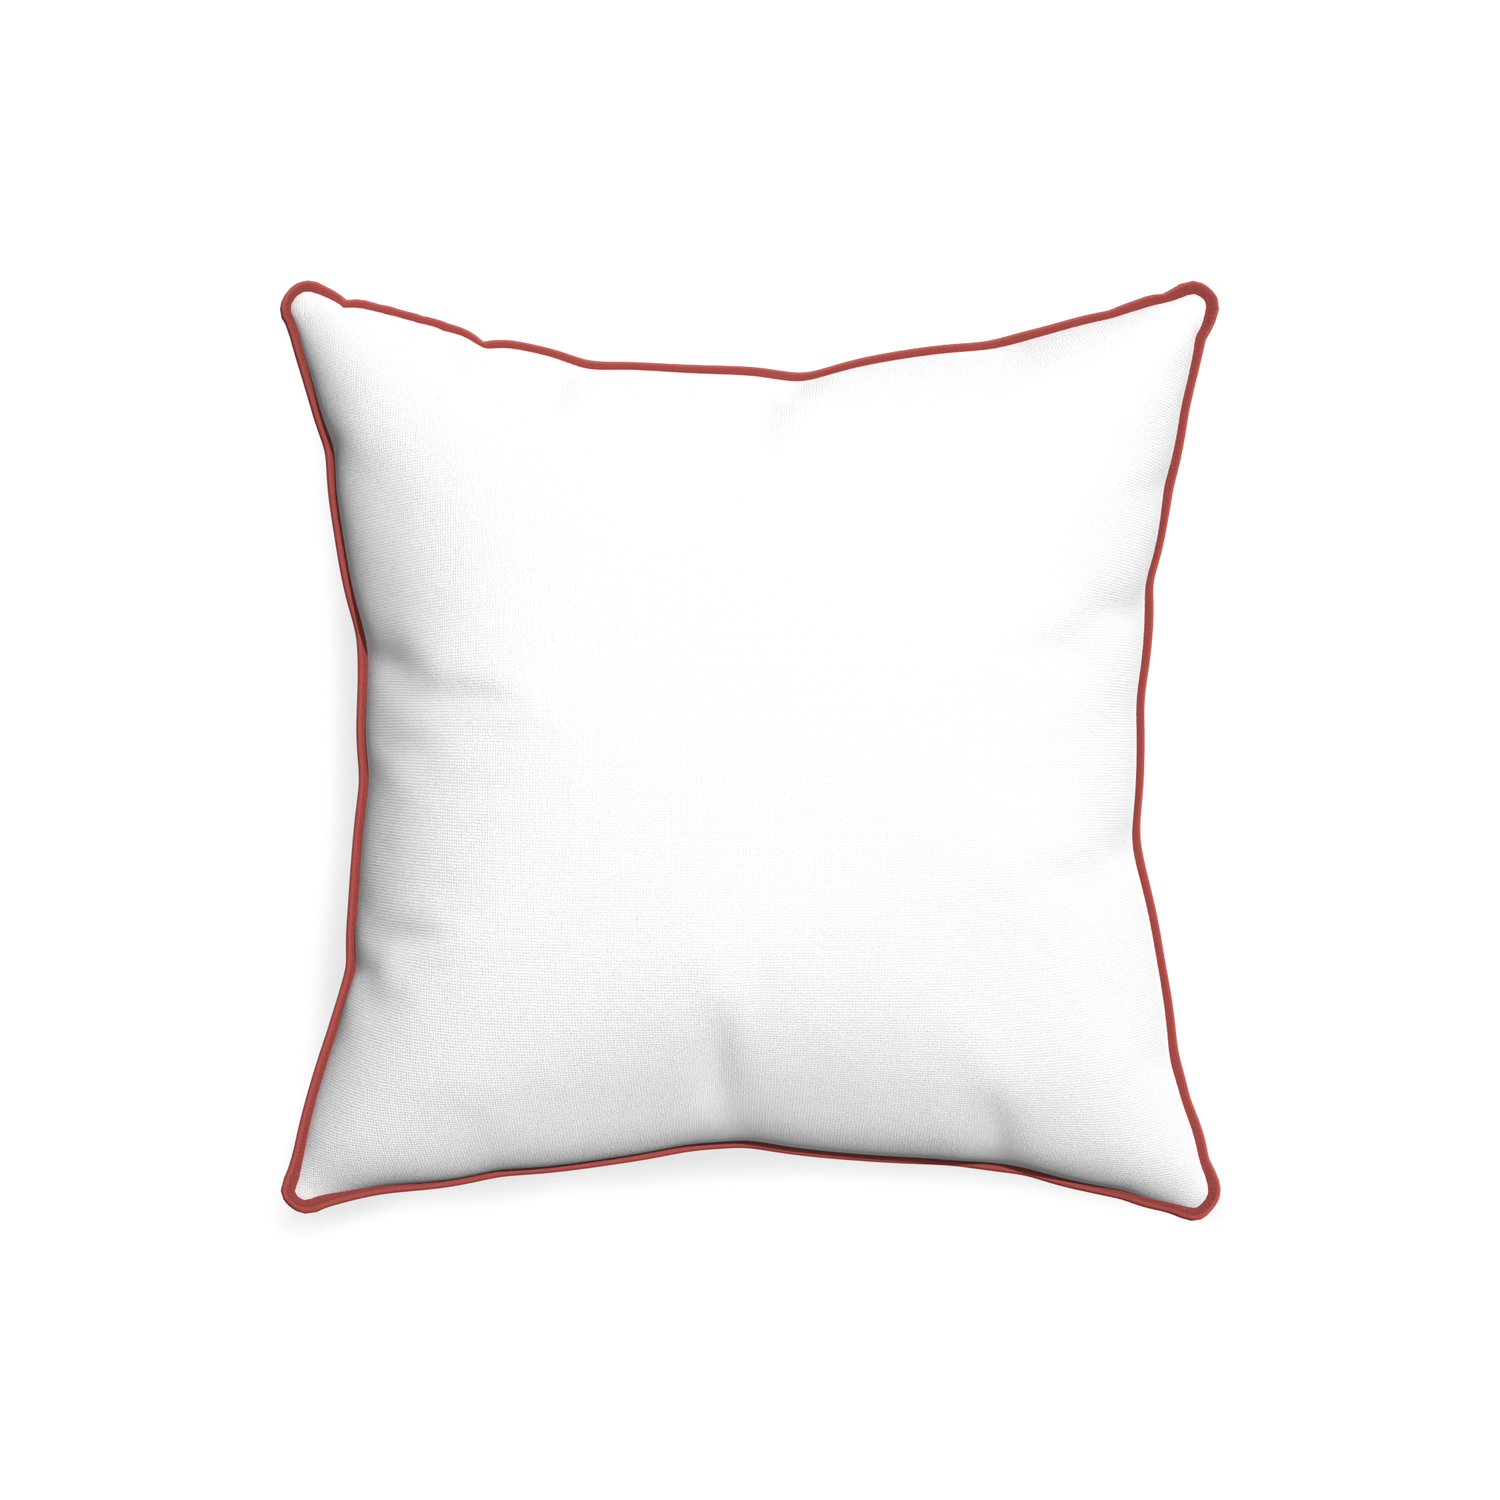 20-square snow custom pillow with c piping on white background